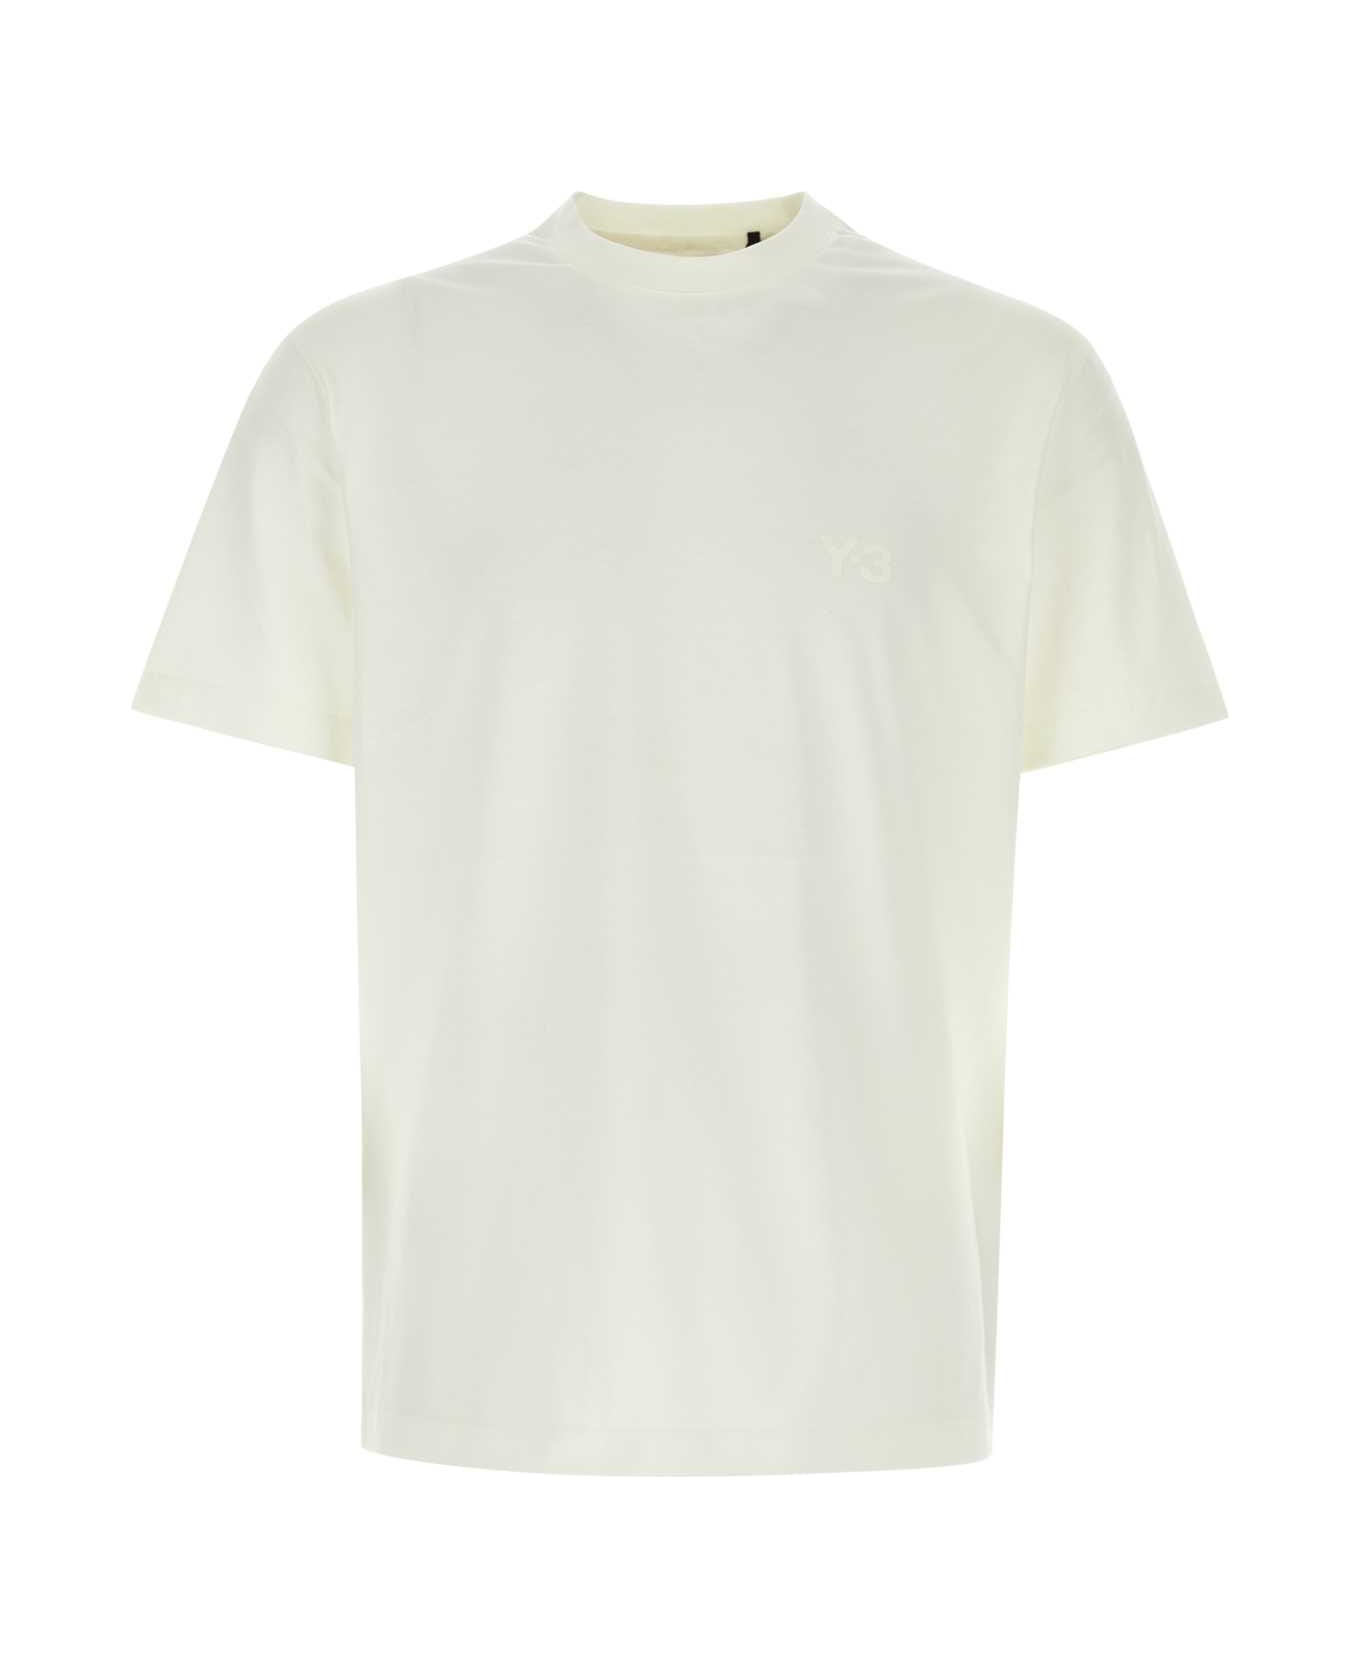 Y-3 Ivory Cotton T-shirt - OWHITE